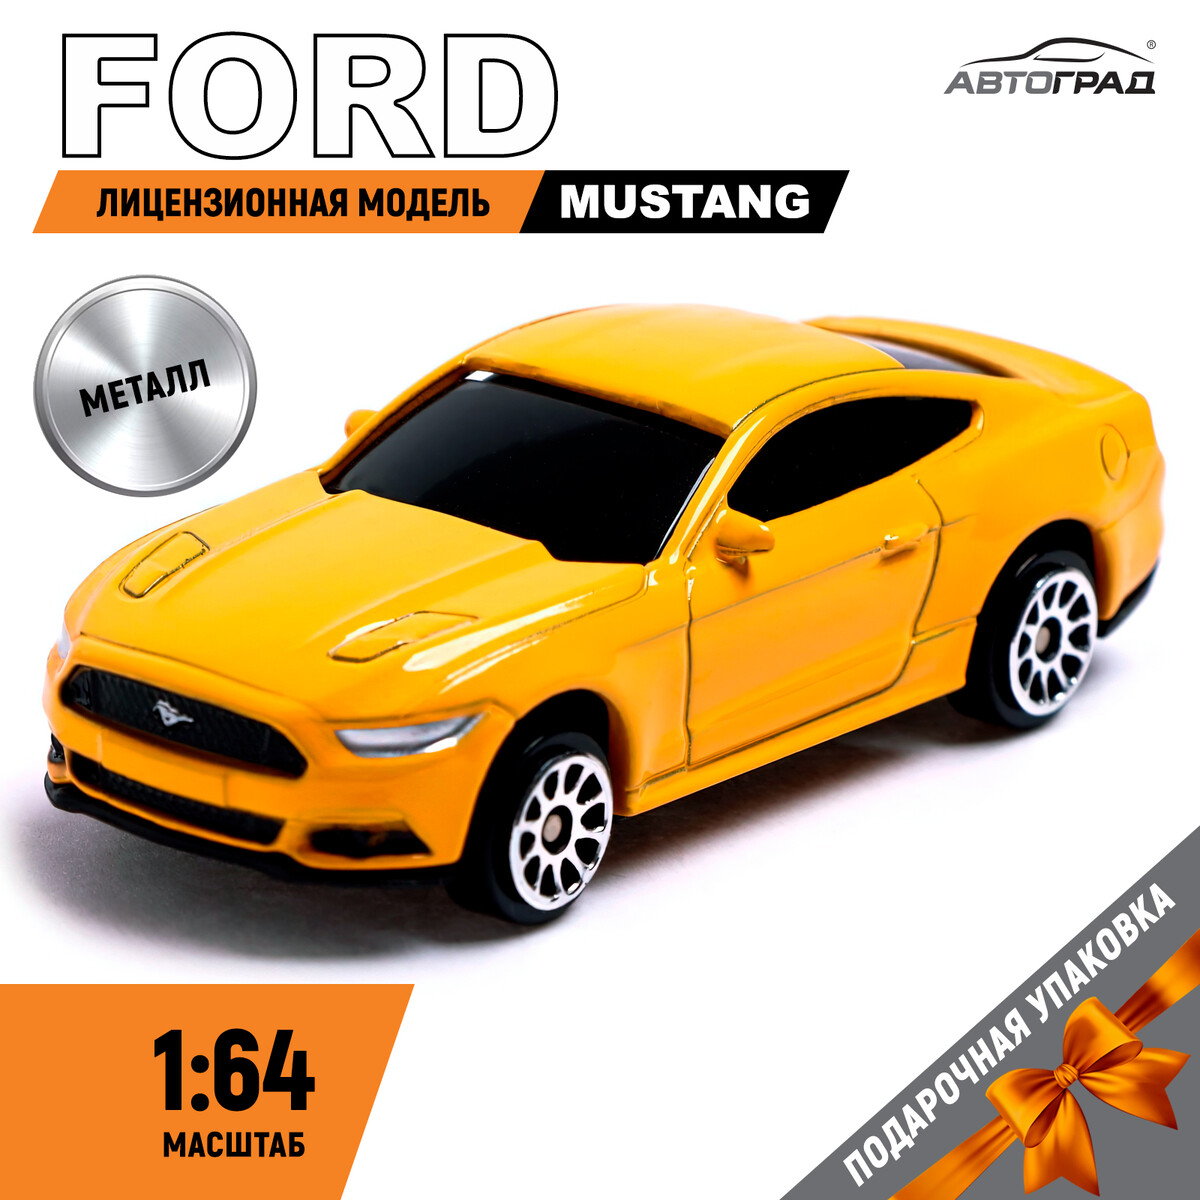 Машина металлическая ford mustang, 1:64, цвет желтый okey remote car key shell replacement for ford 3 4 5 button edge explorer ranger expedition mustang escape taurus mazda tribute